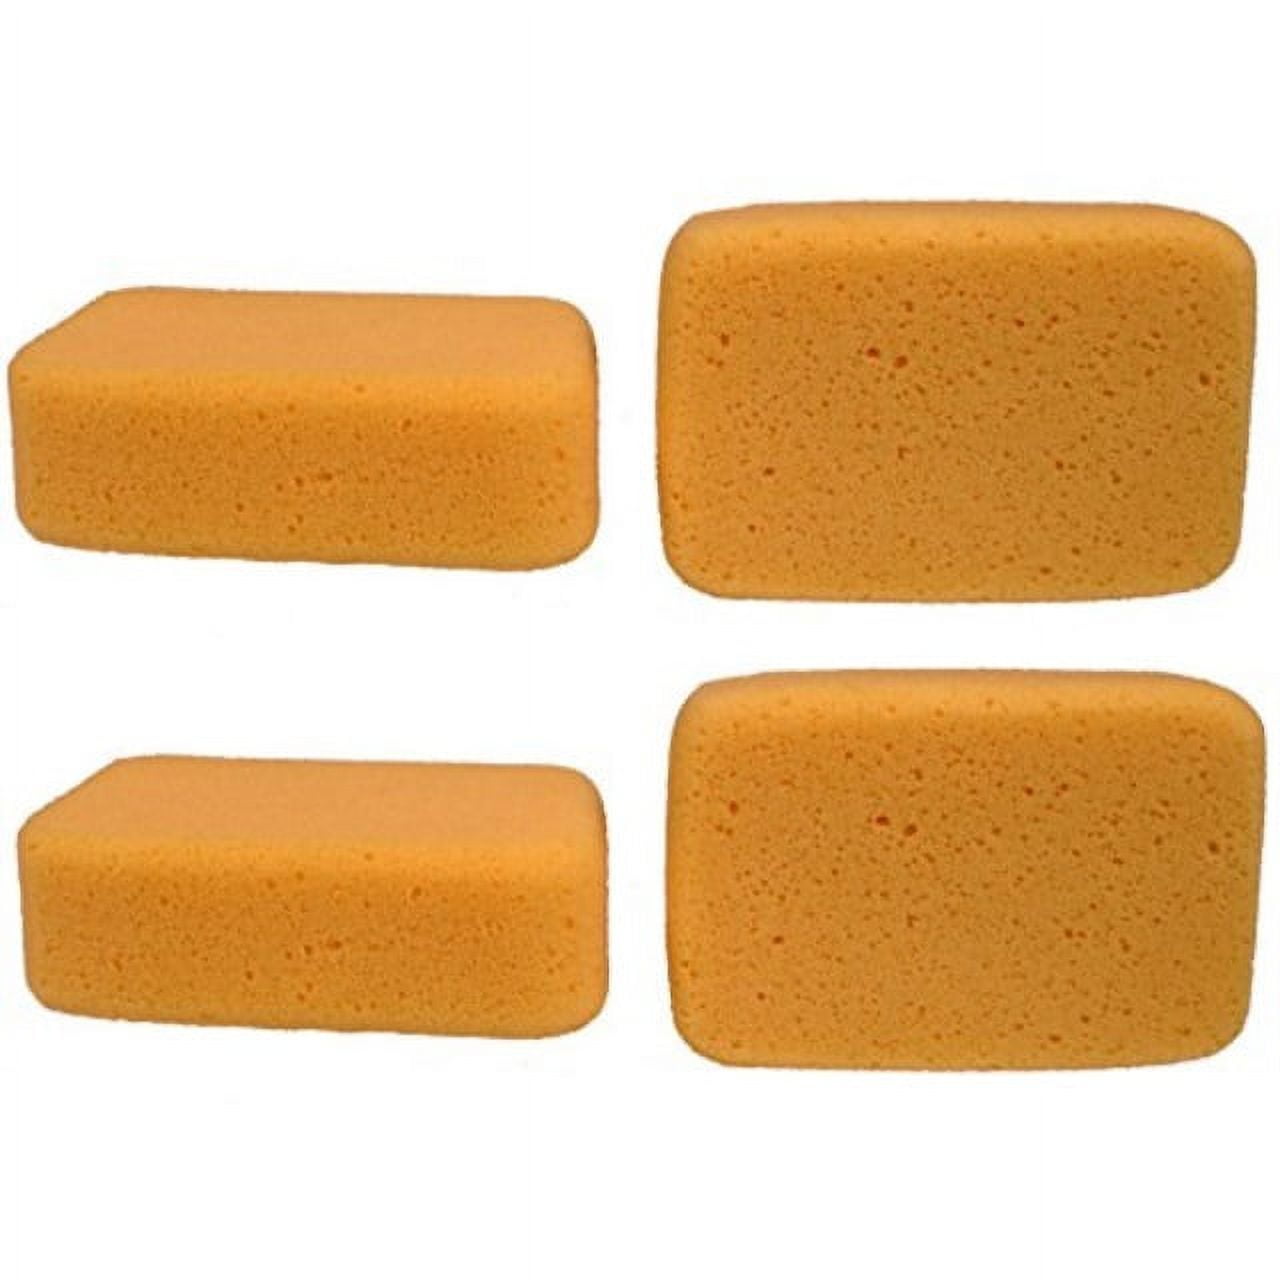 Value Pack of 4 Sponges for Painting, Crafts, Grout, Cleaning & More,  Synthetic Silk Sponges, Big 7.5 inch x 5 inch x 2 inch Thick - Wholesale  Craft Outlet